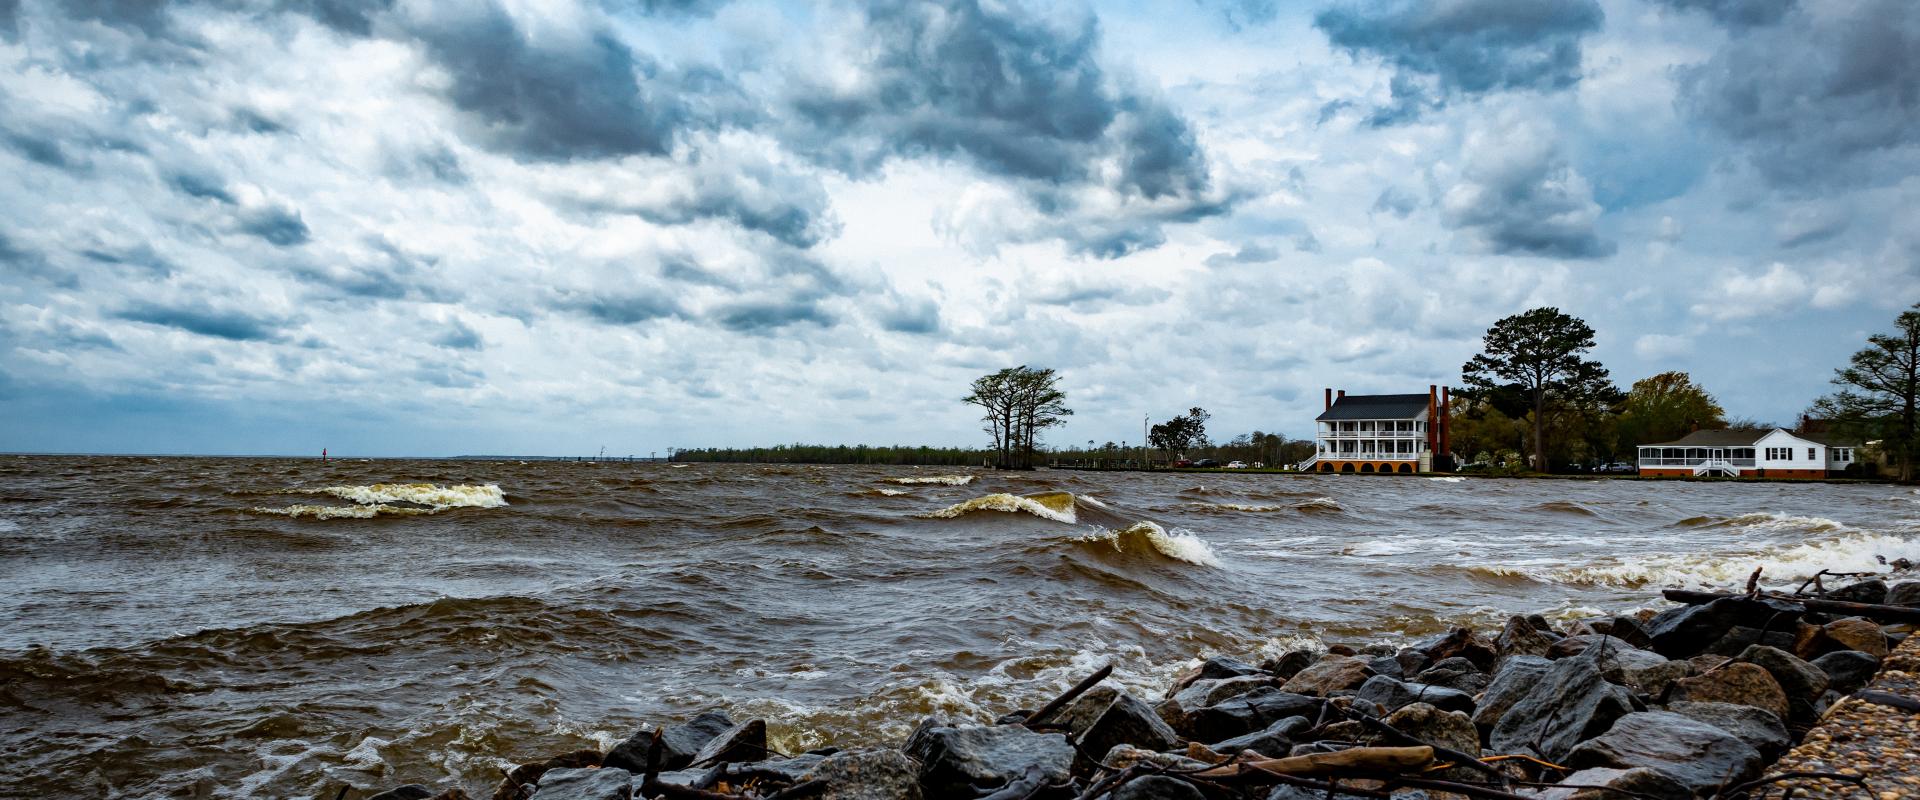 Choppy waters of Edenton Bay, Penelope Barker House in the background 